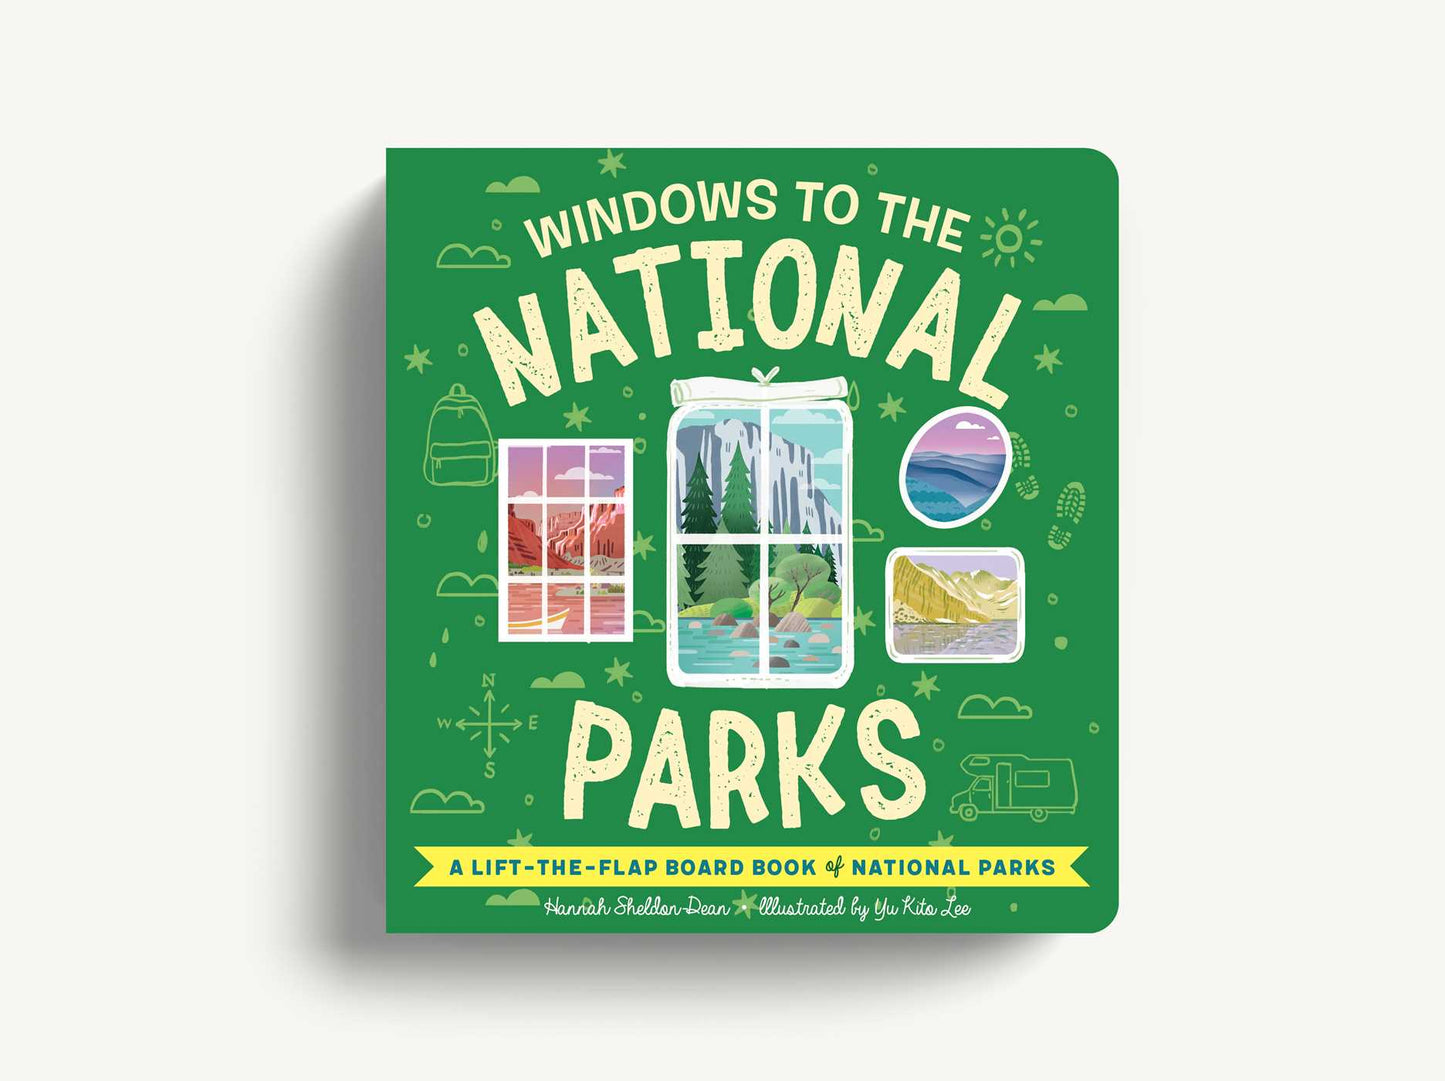 Windows to the National Parks: A Lift-the-Flap Board Book of North American National Parks